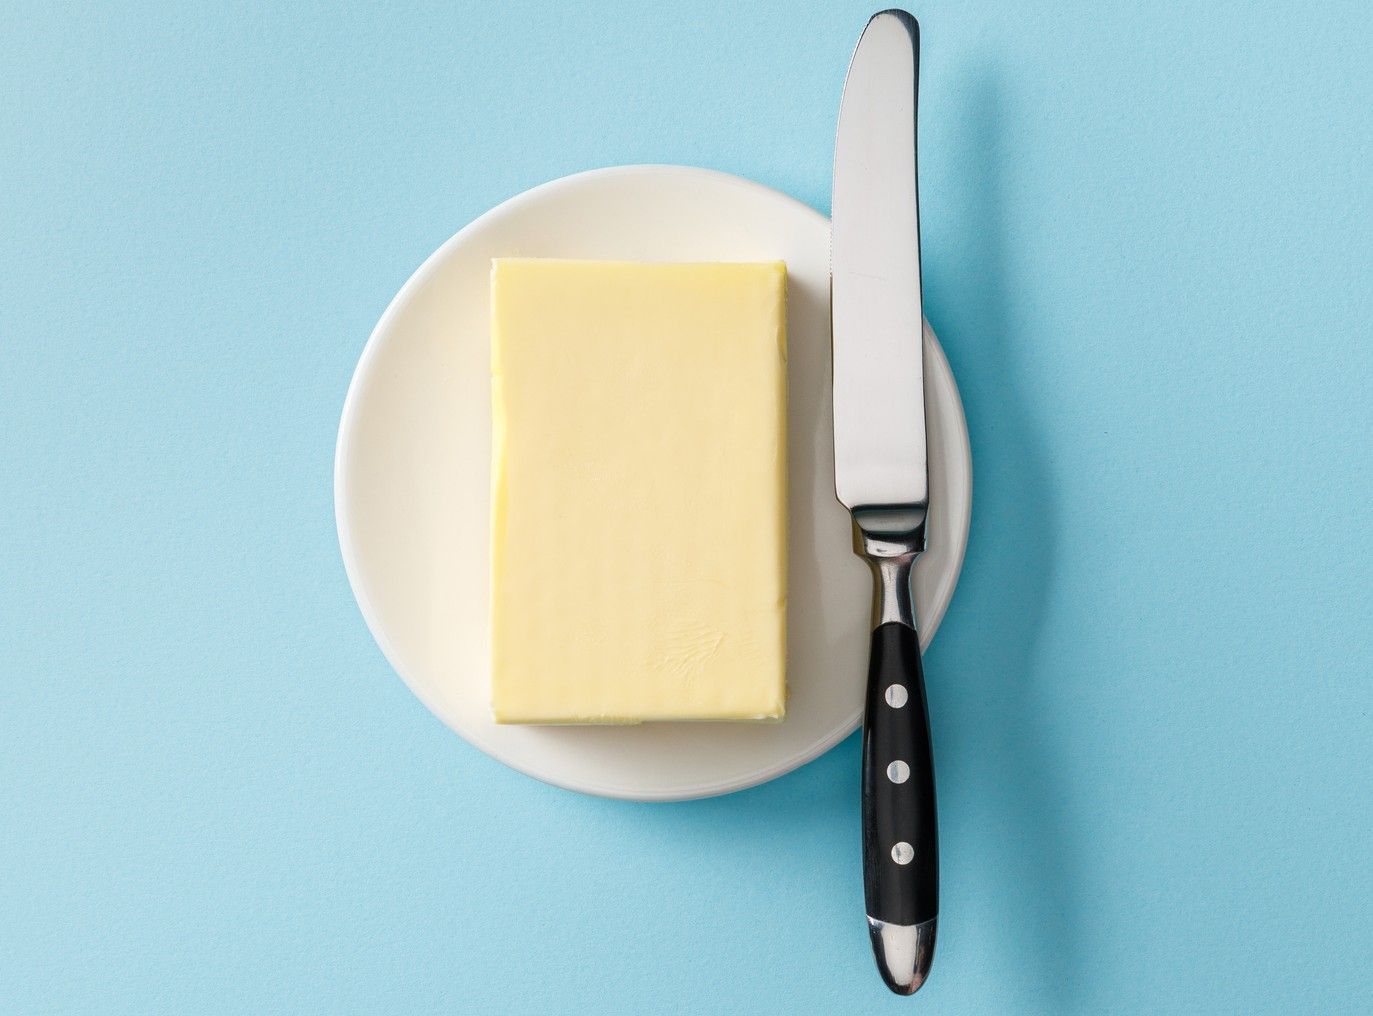 If you're butter seems a little off lately, palm oil may be to blame.